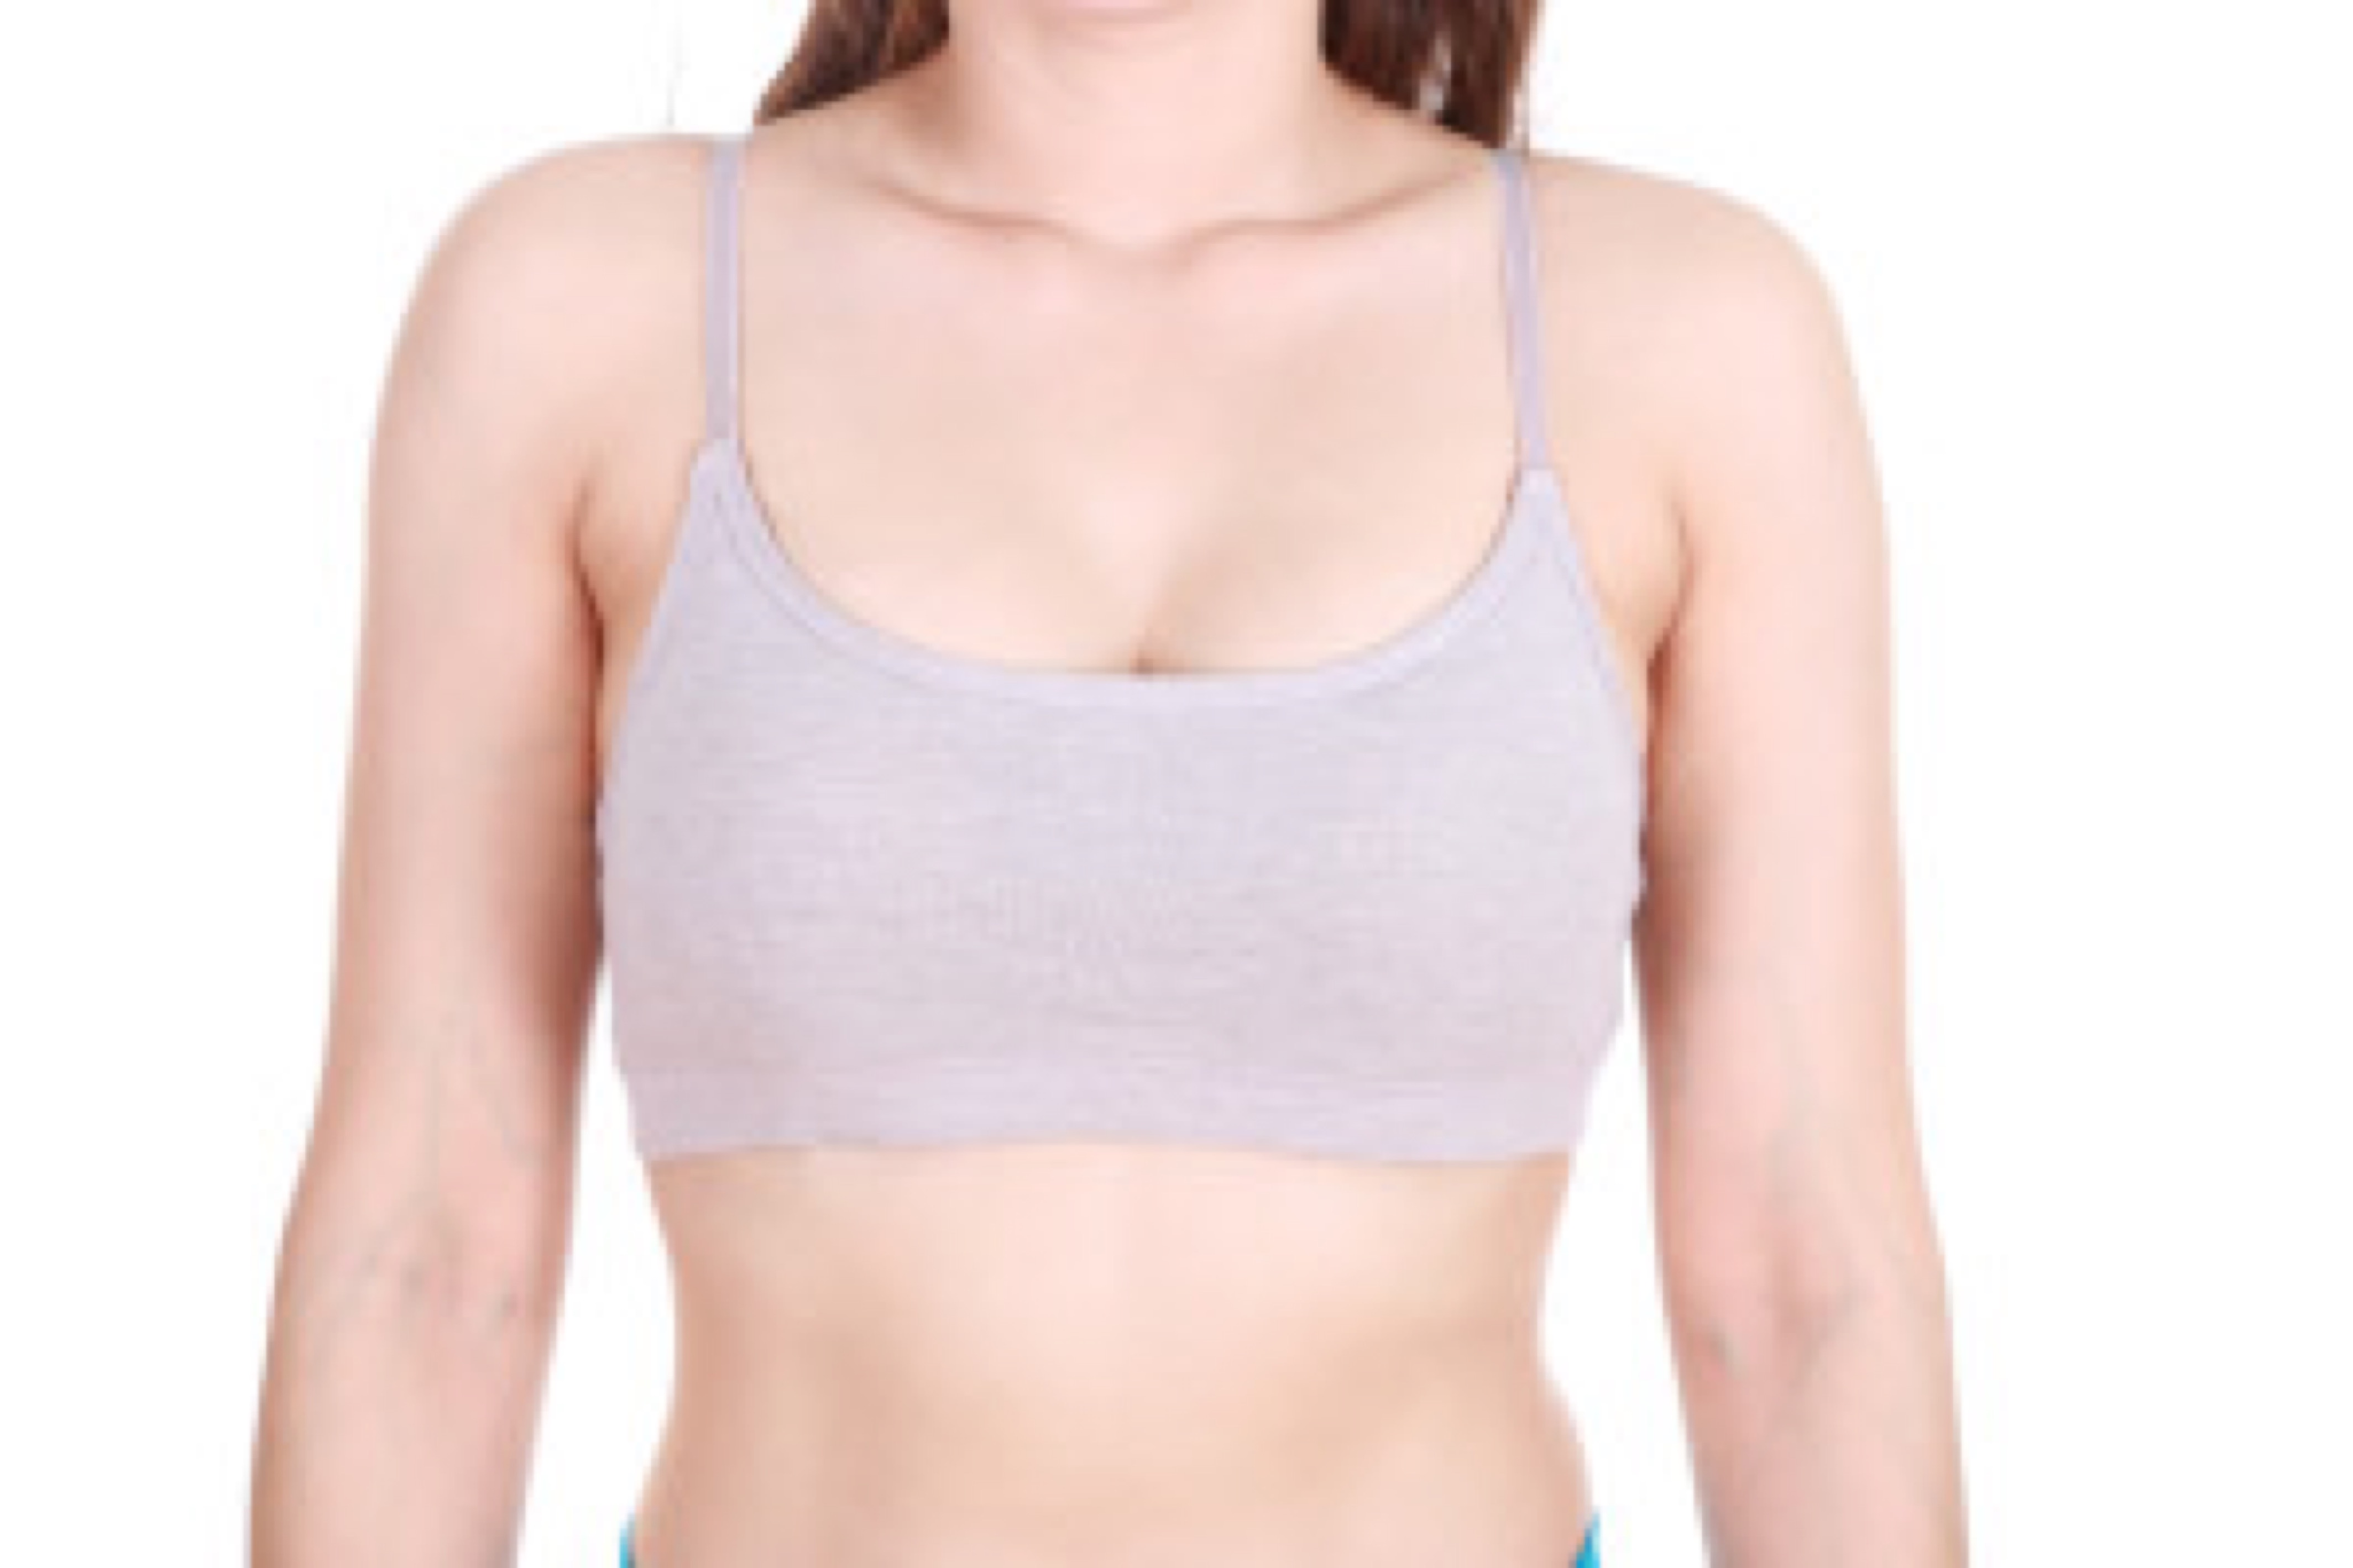 close up of a woman's chest in her sports bra